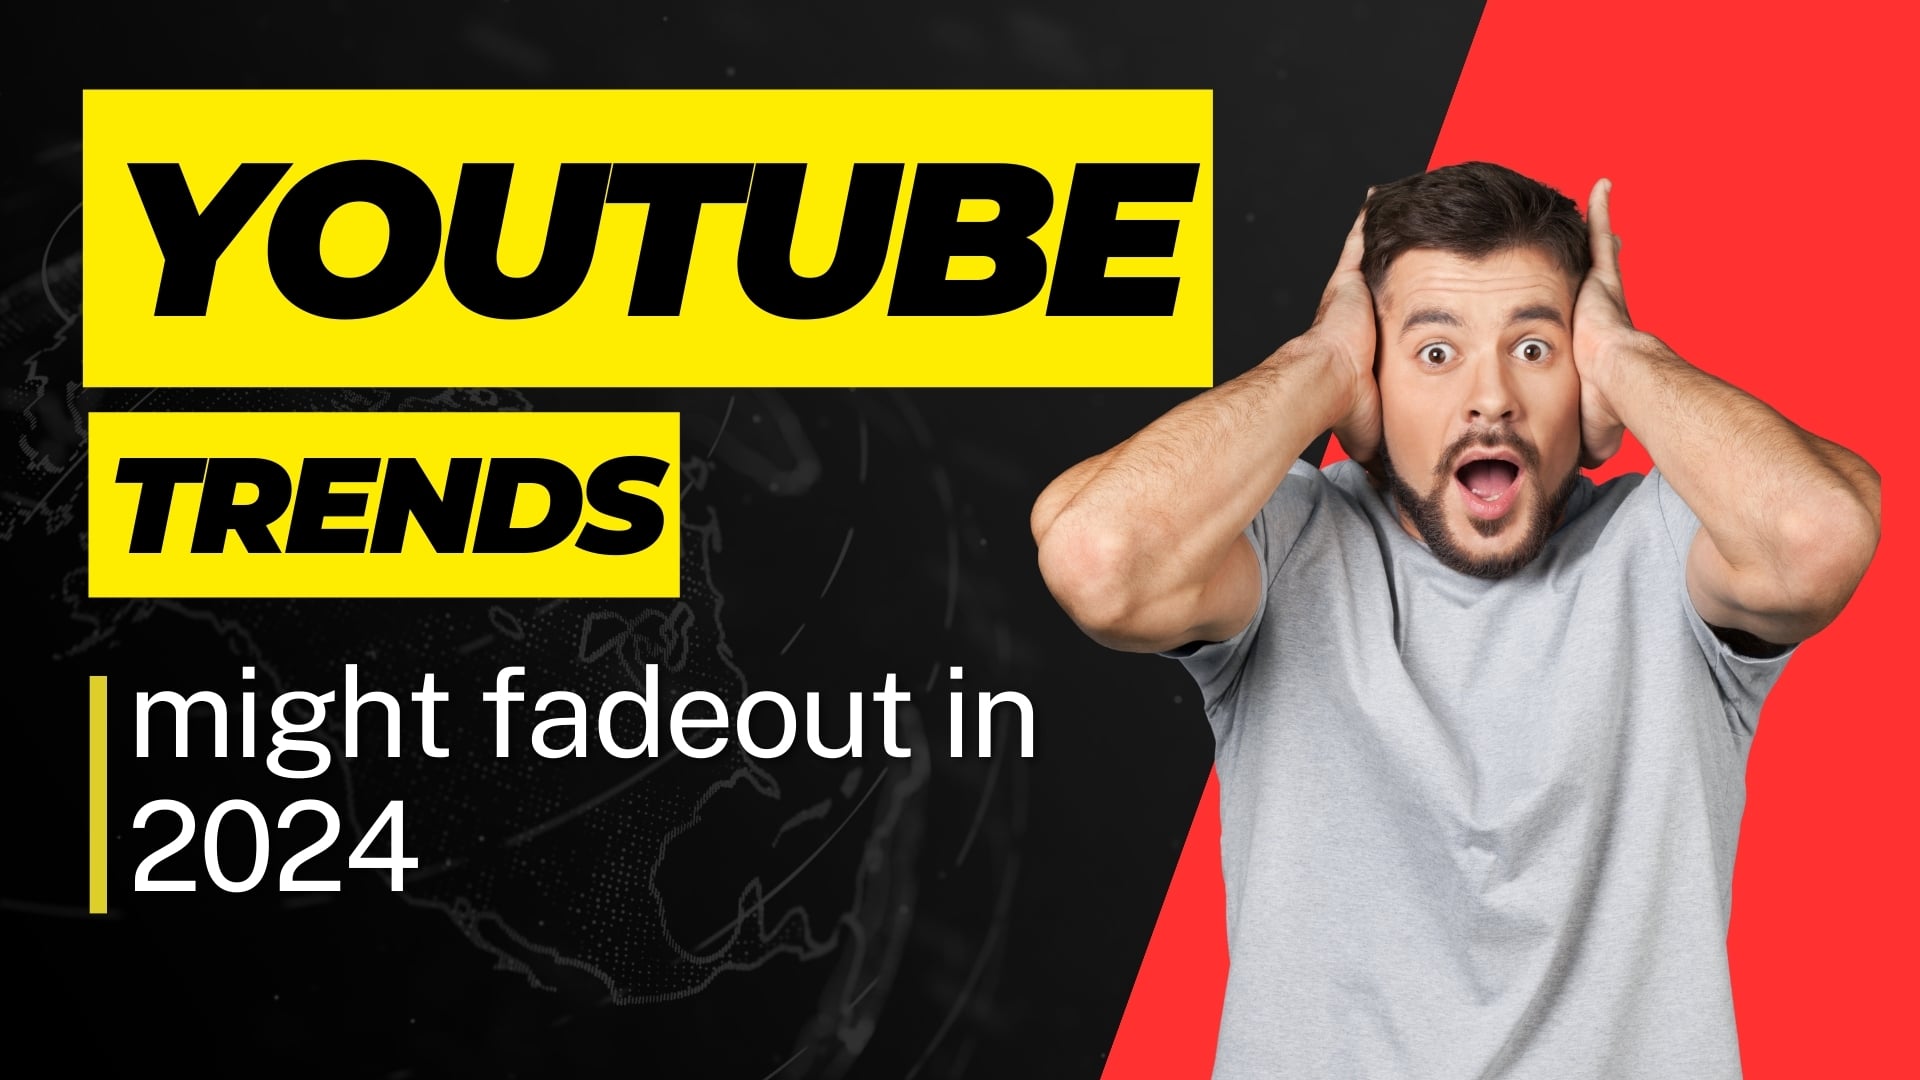 YouTube trends that might fadeout in 2024